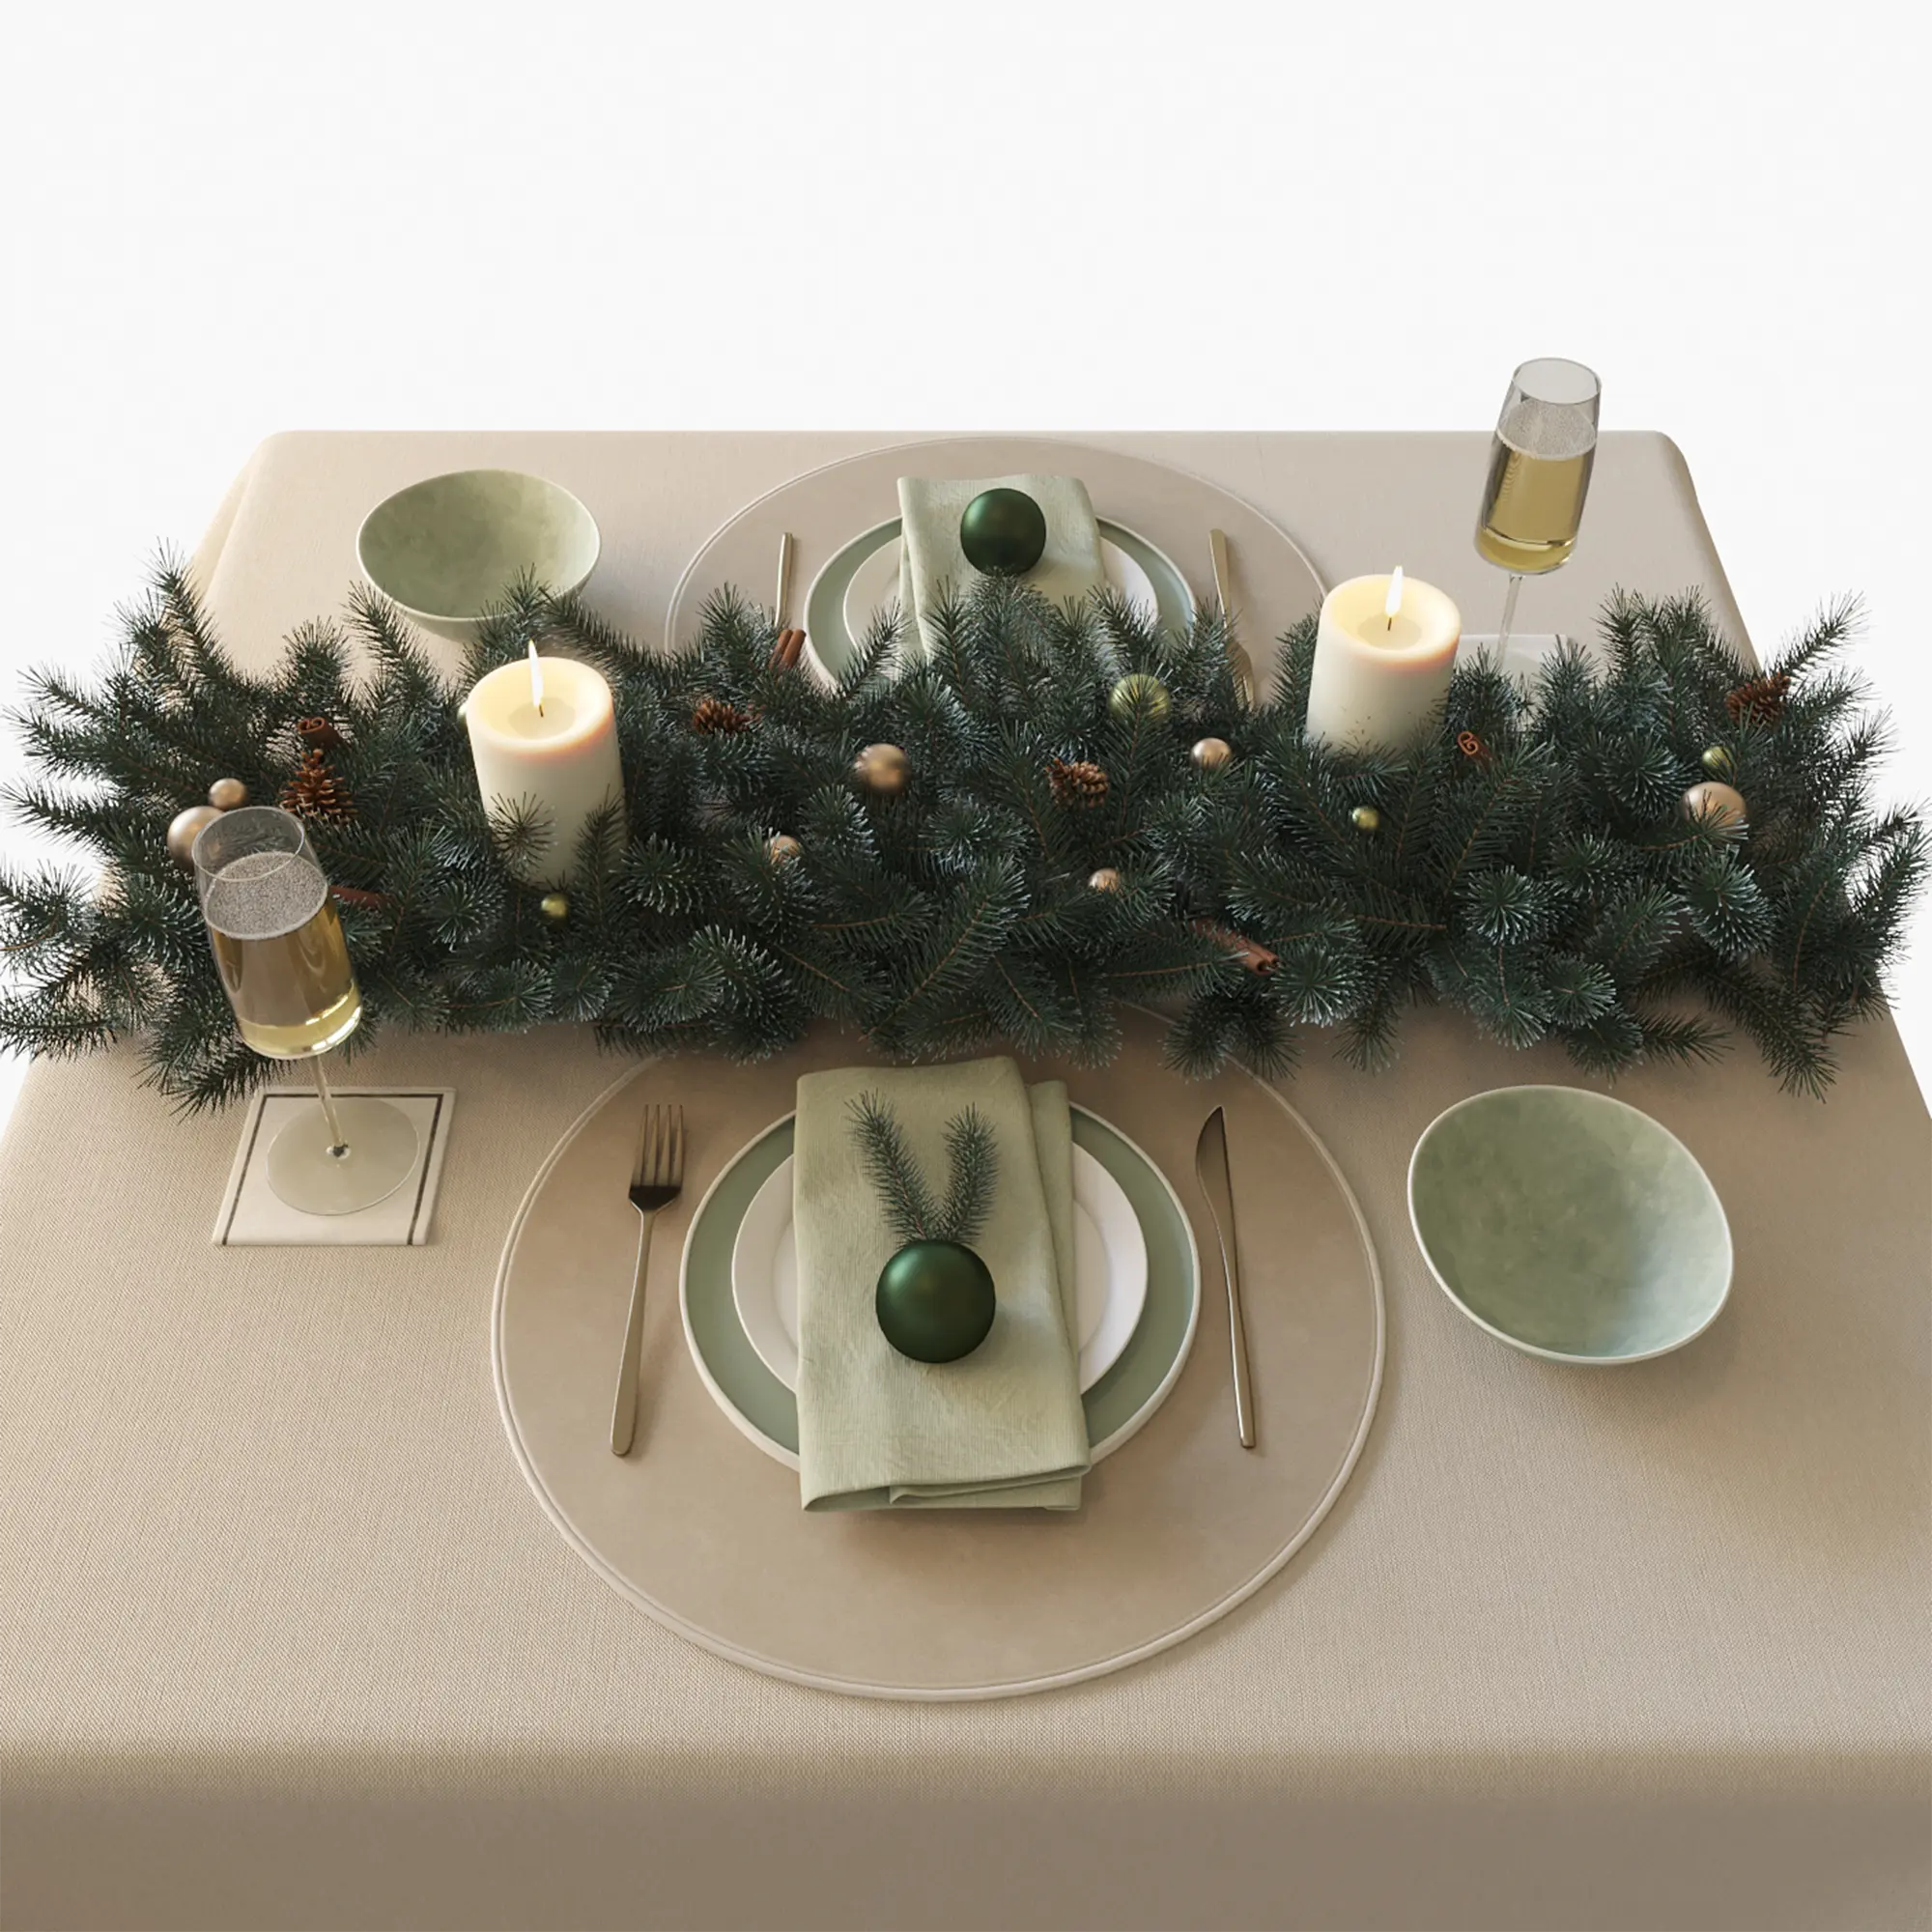 New Year table setting N3 3D model download on cg.market, 3ds max, Corona Render.